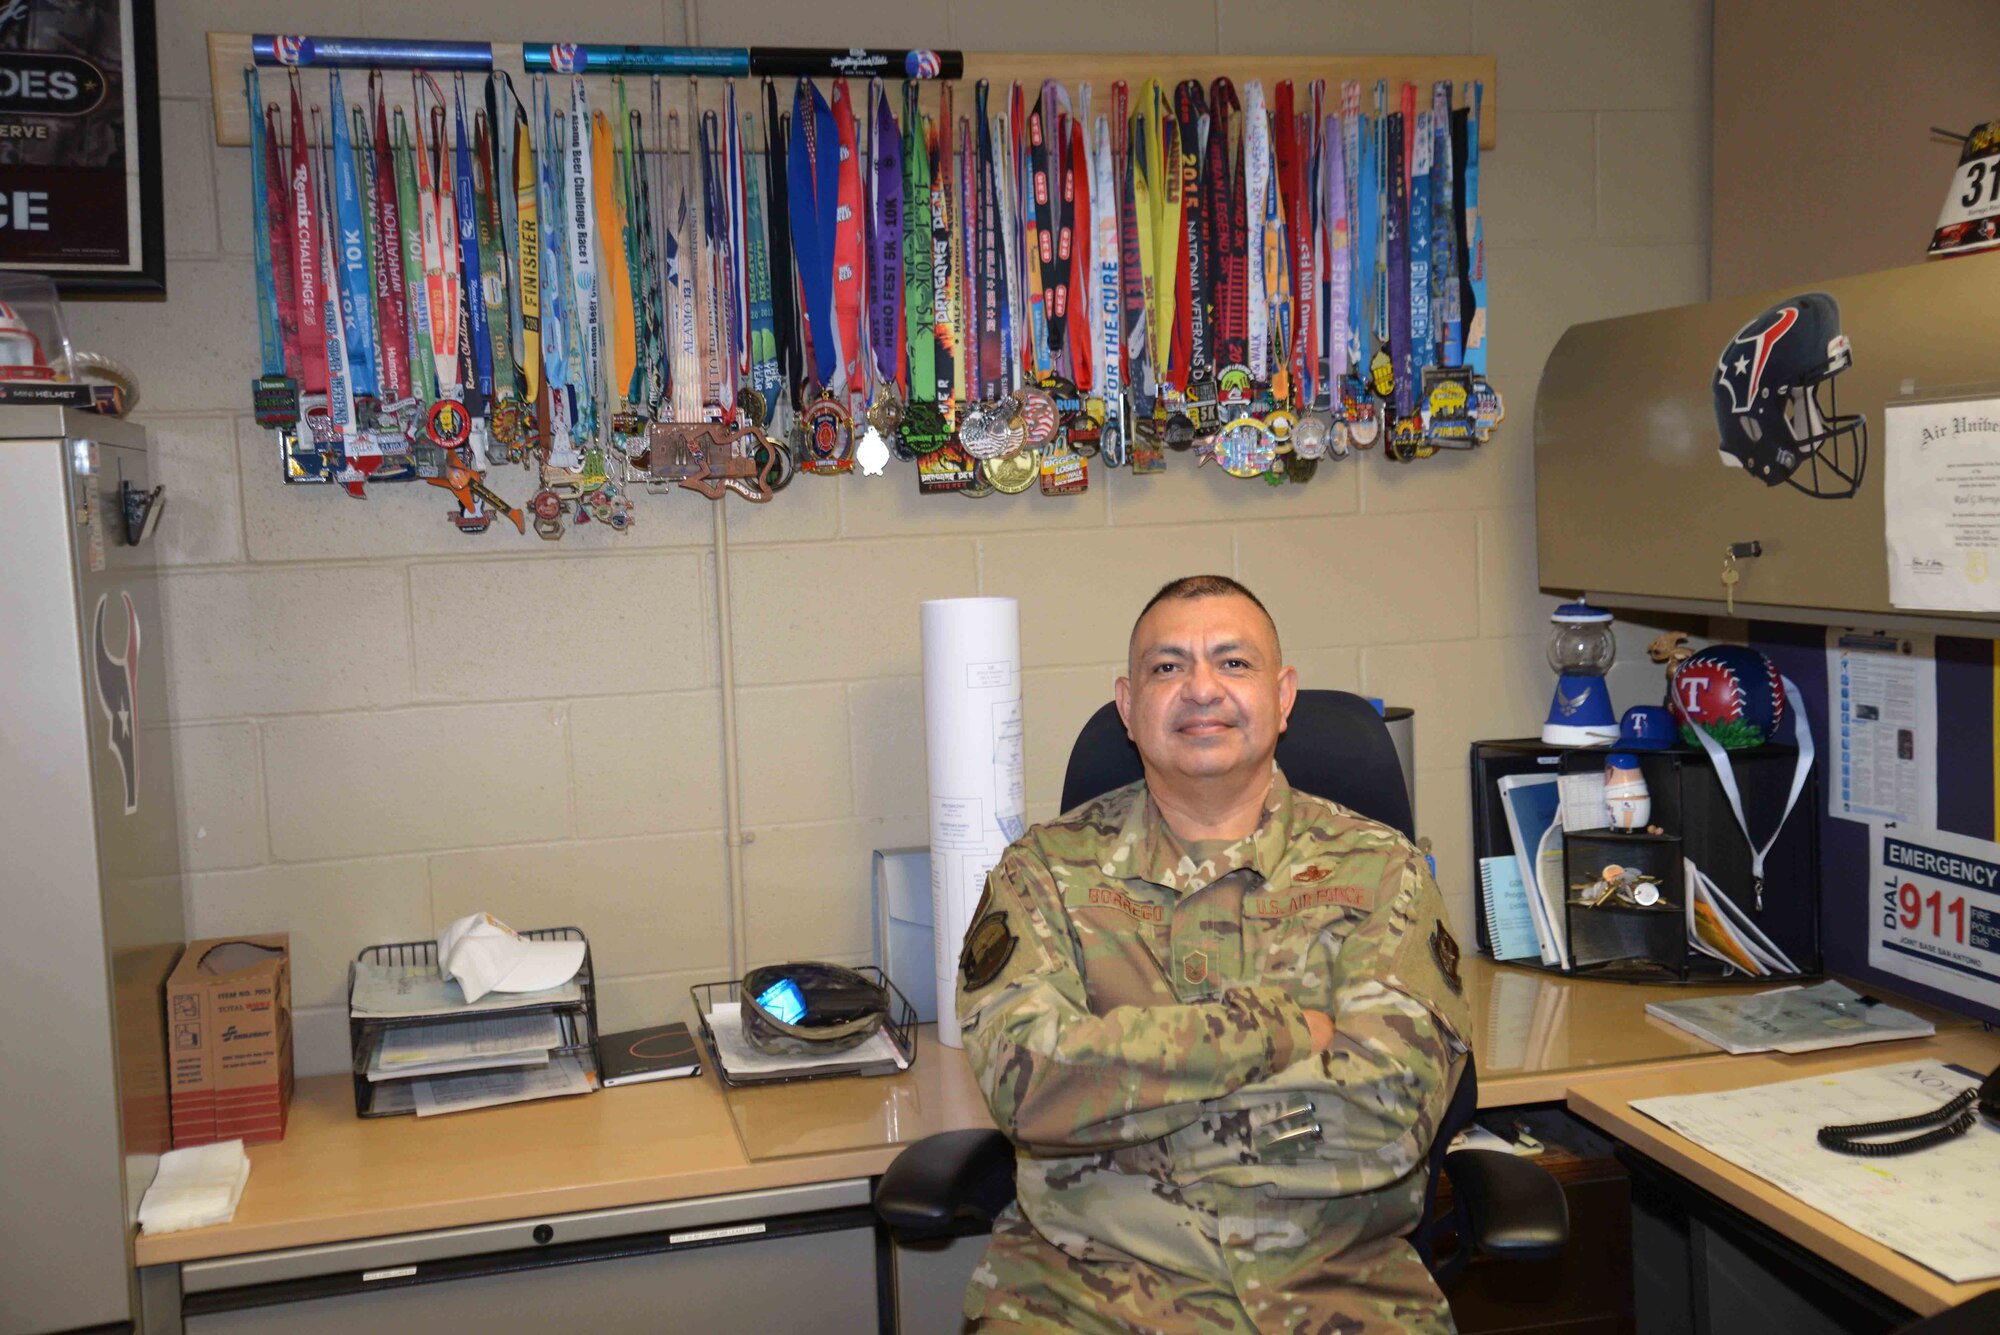 With his finisher medals in the background, Master Sgt. Raul Borrego, 433rd Aircraft Maintenance Squadron aircraft mechanic supervisor, is one of the Reserve Citizen Airmen that Chief Master Sgt. Pedro Saenz, 433rd Aircraft Maintenance superintendent, provides with support regarding his battle with Type 2 diabetes.